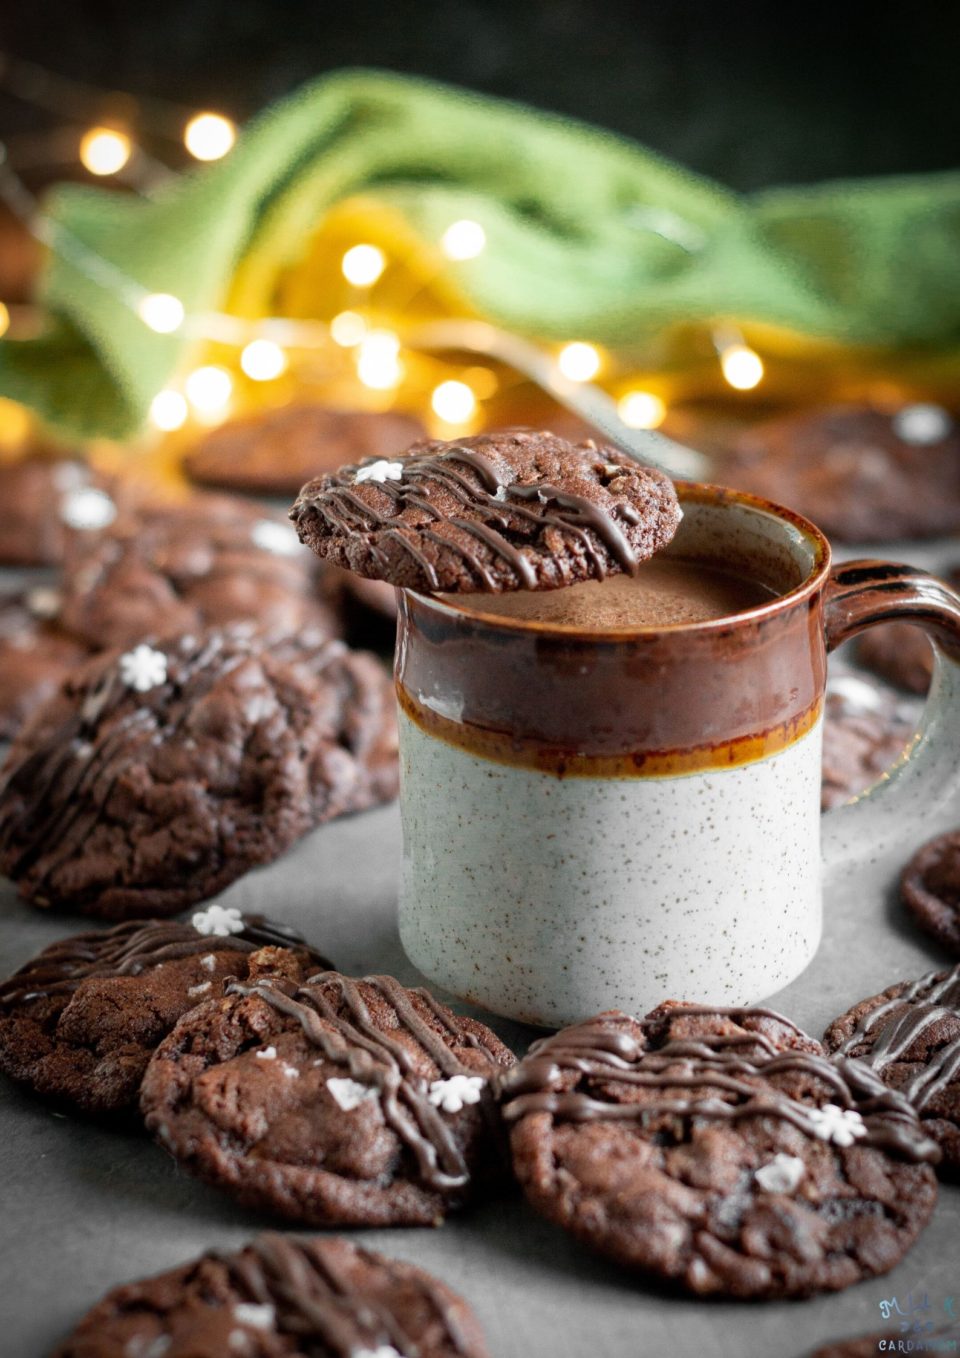 Candied Ginger and Almond Chocolate Cookies | Milk and Cardamom